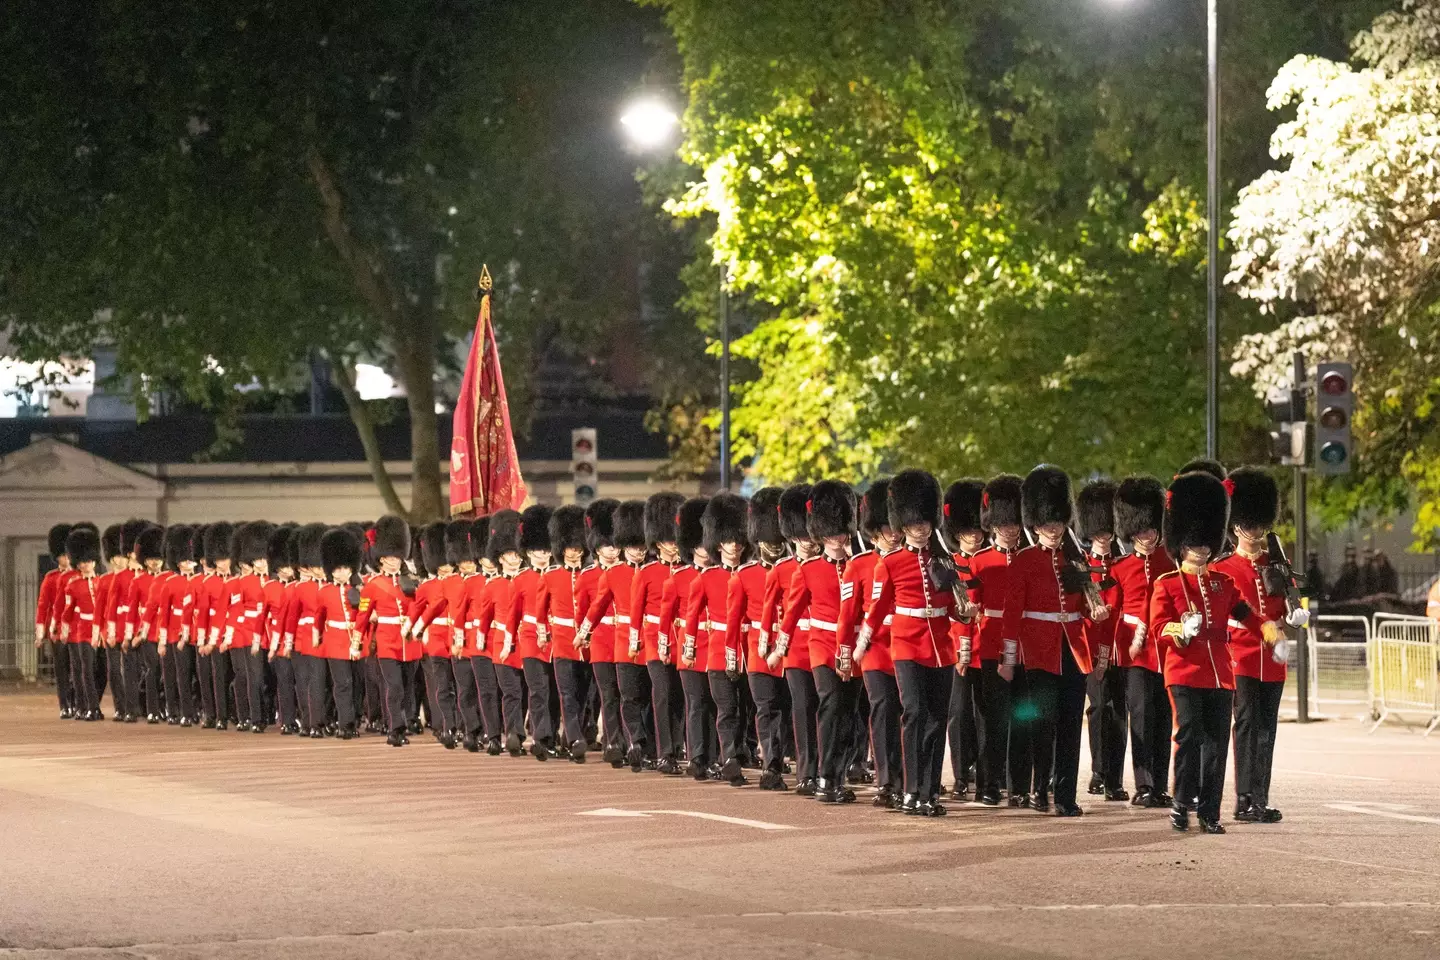 A rehearsal ahead of the Queen's funeral.